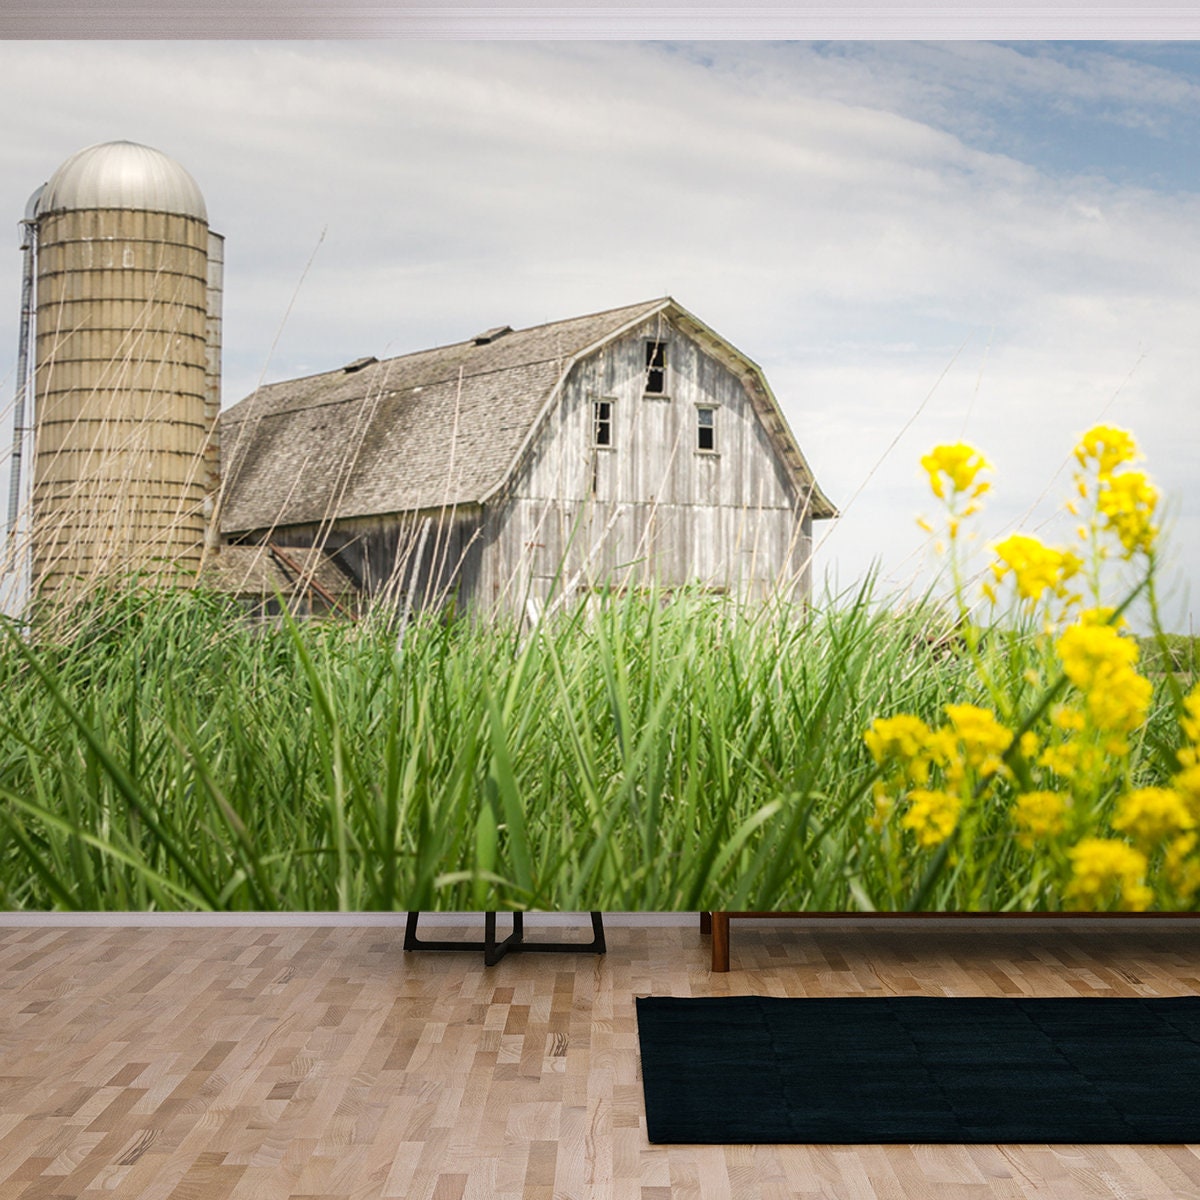 Beautiful Field Photo with Rustic Barn Resting in a Field of Grass Wallpaper Living Room Mural